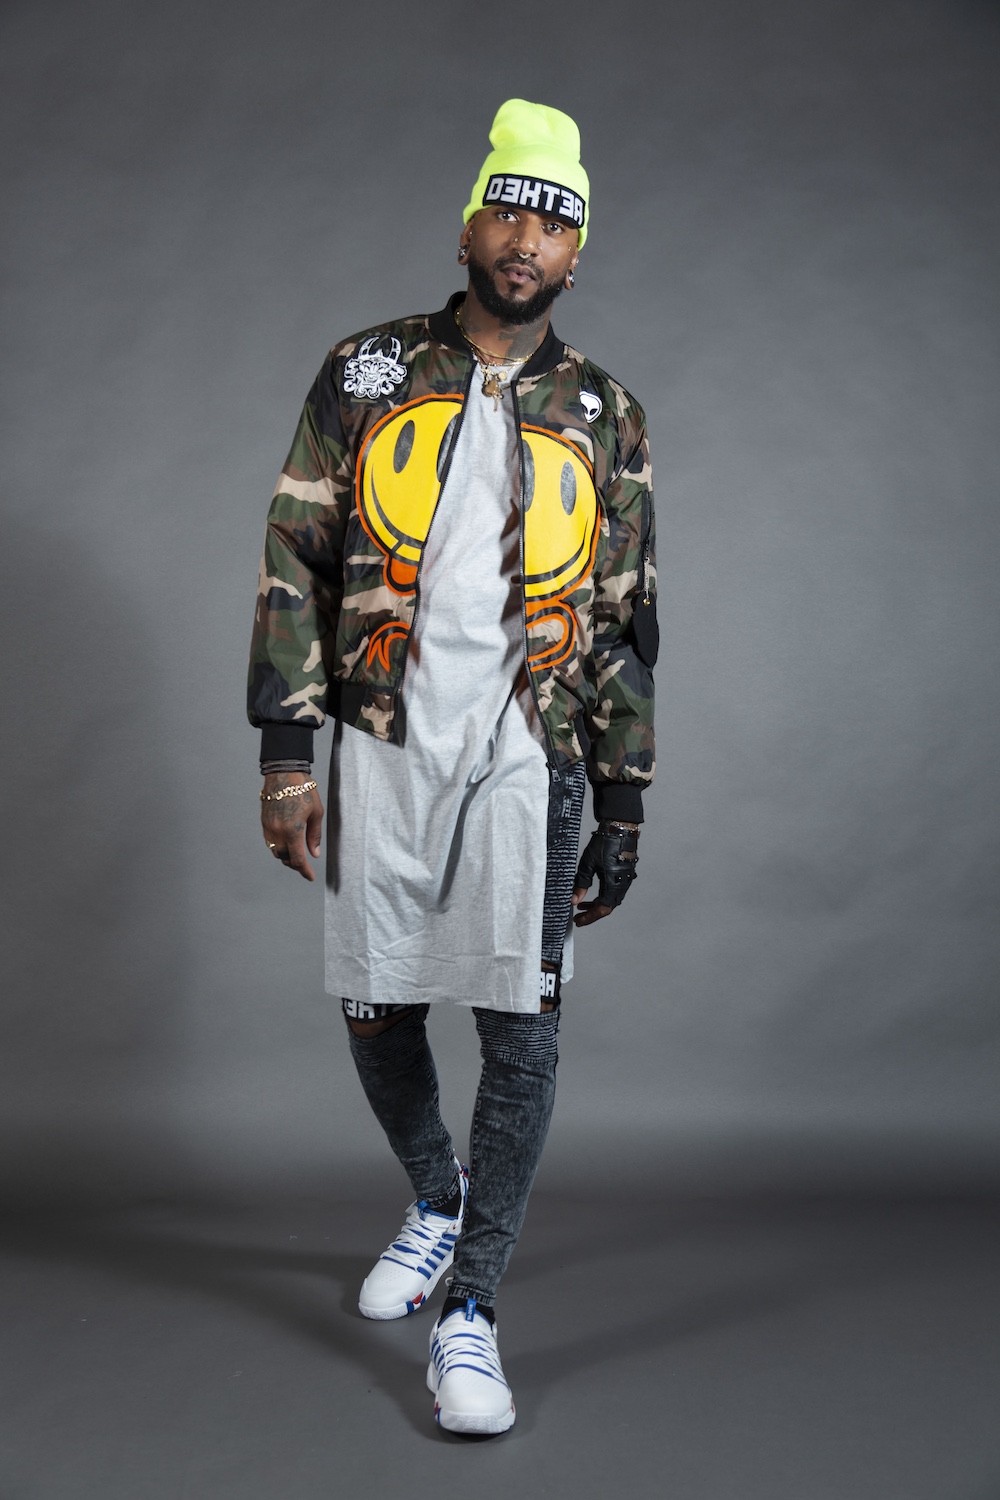 Designer Dexter Simmons' new 'Wavy' line was born in SF clubs - 48 hills